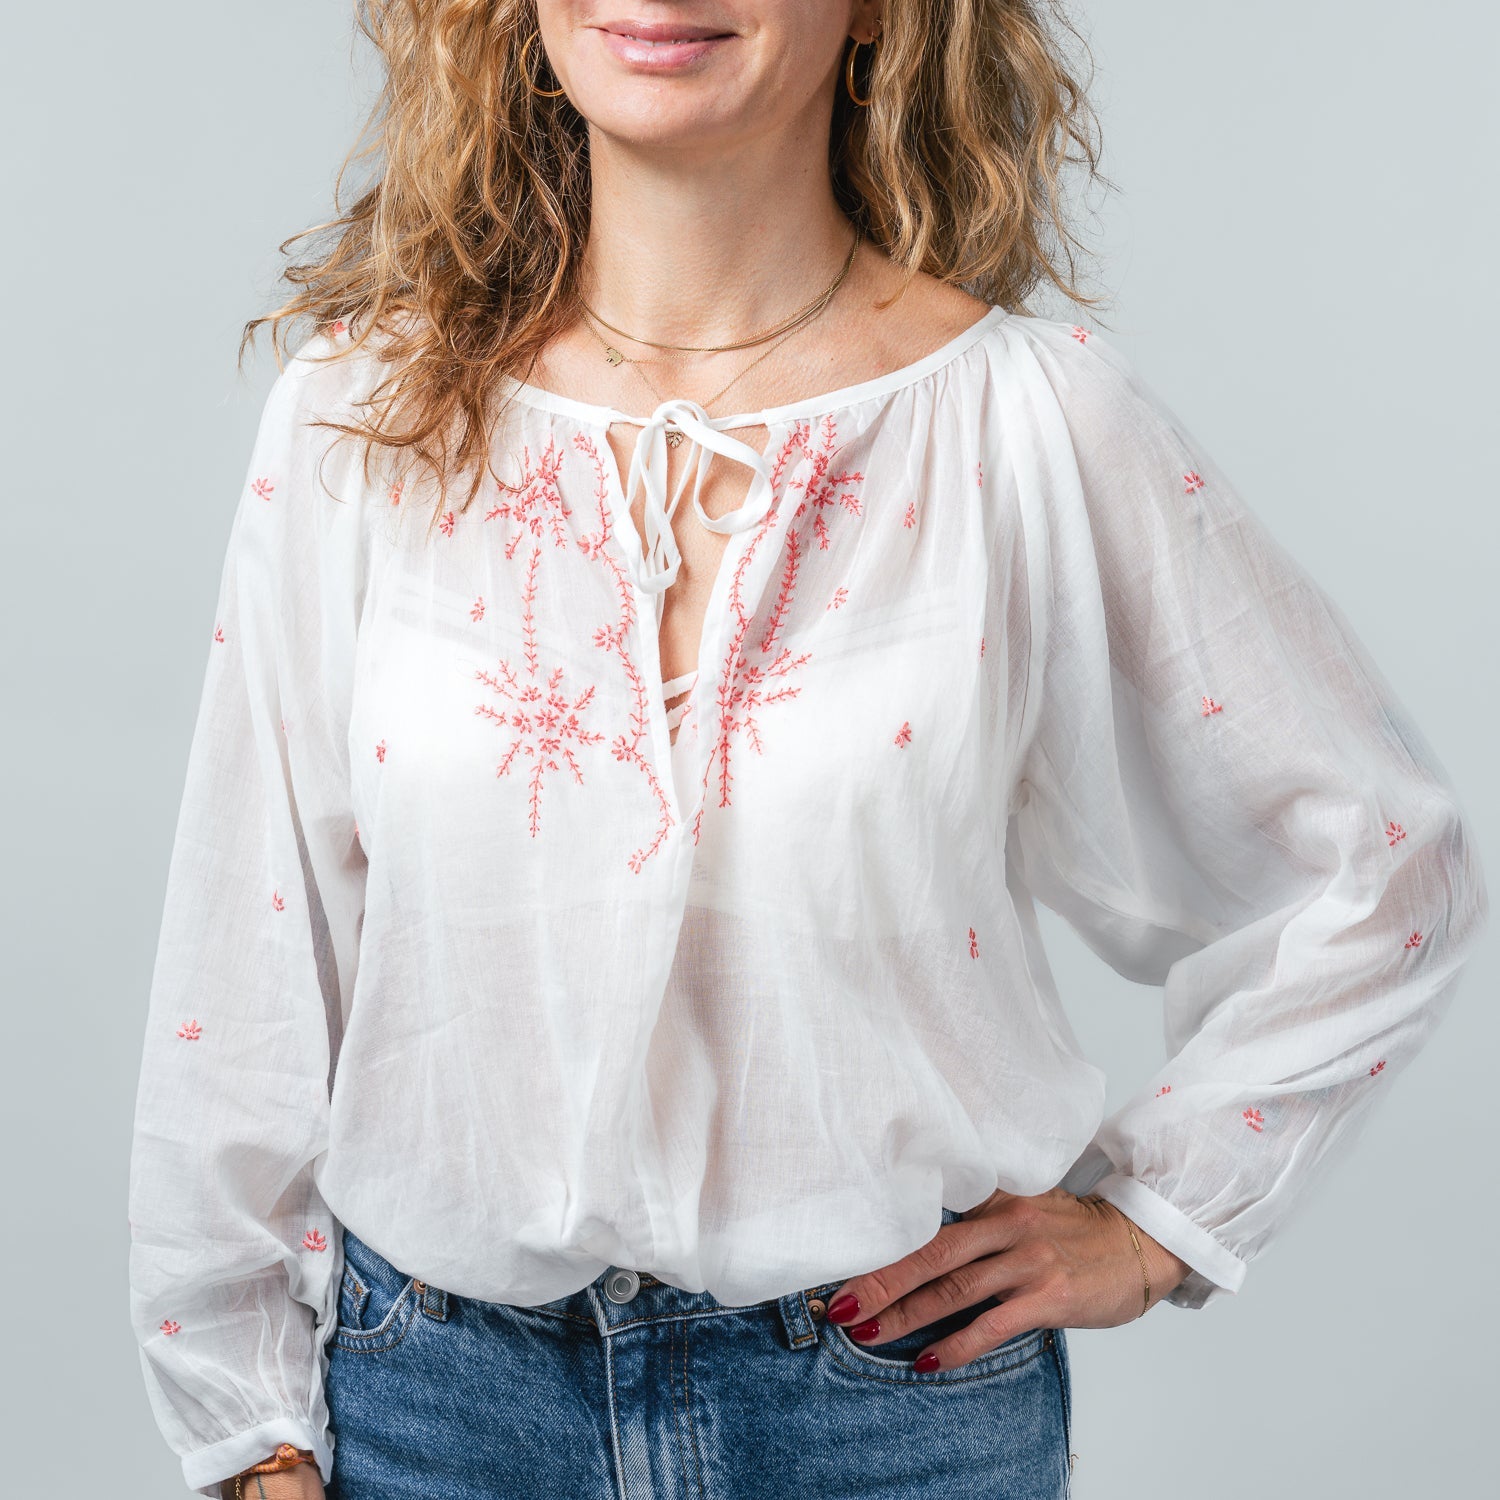 embroidered flower top